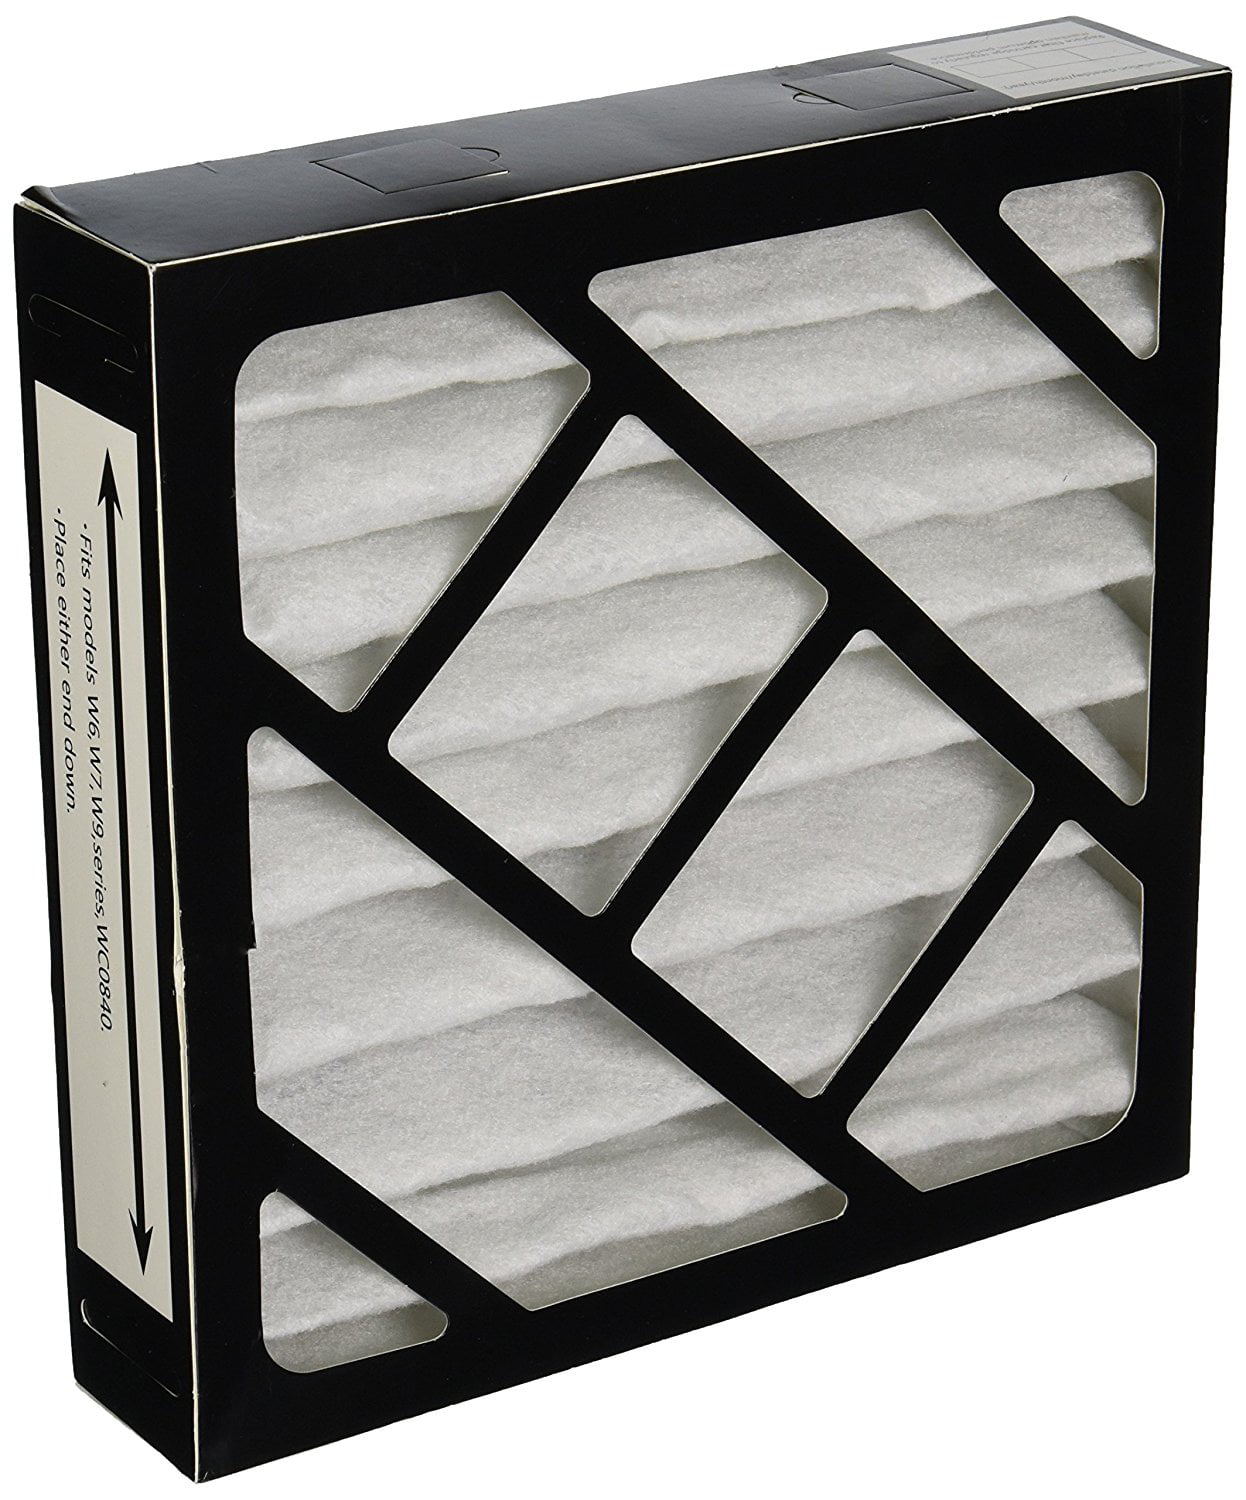 2845,Holmes W6 3x Humidifier Filter for Bionaire  WC0840 